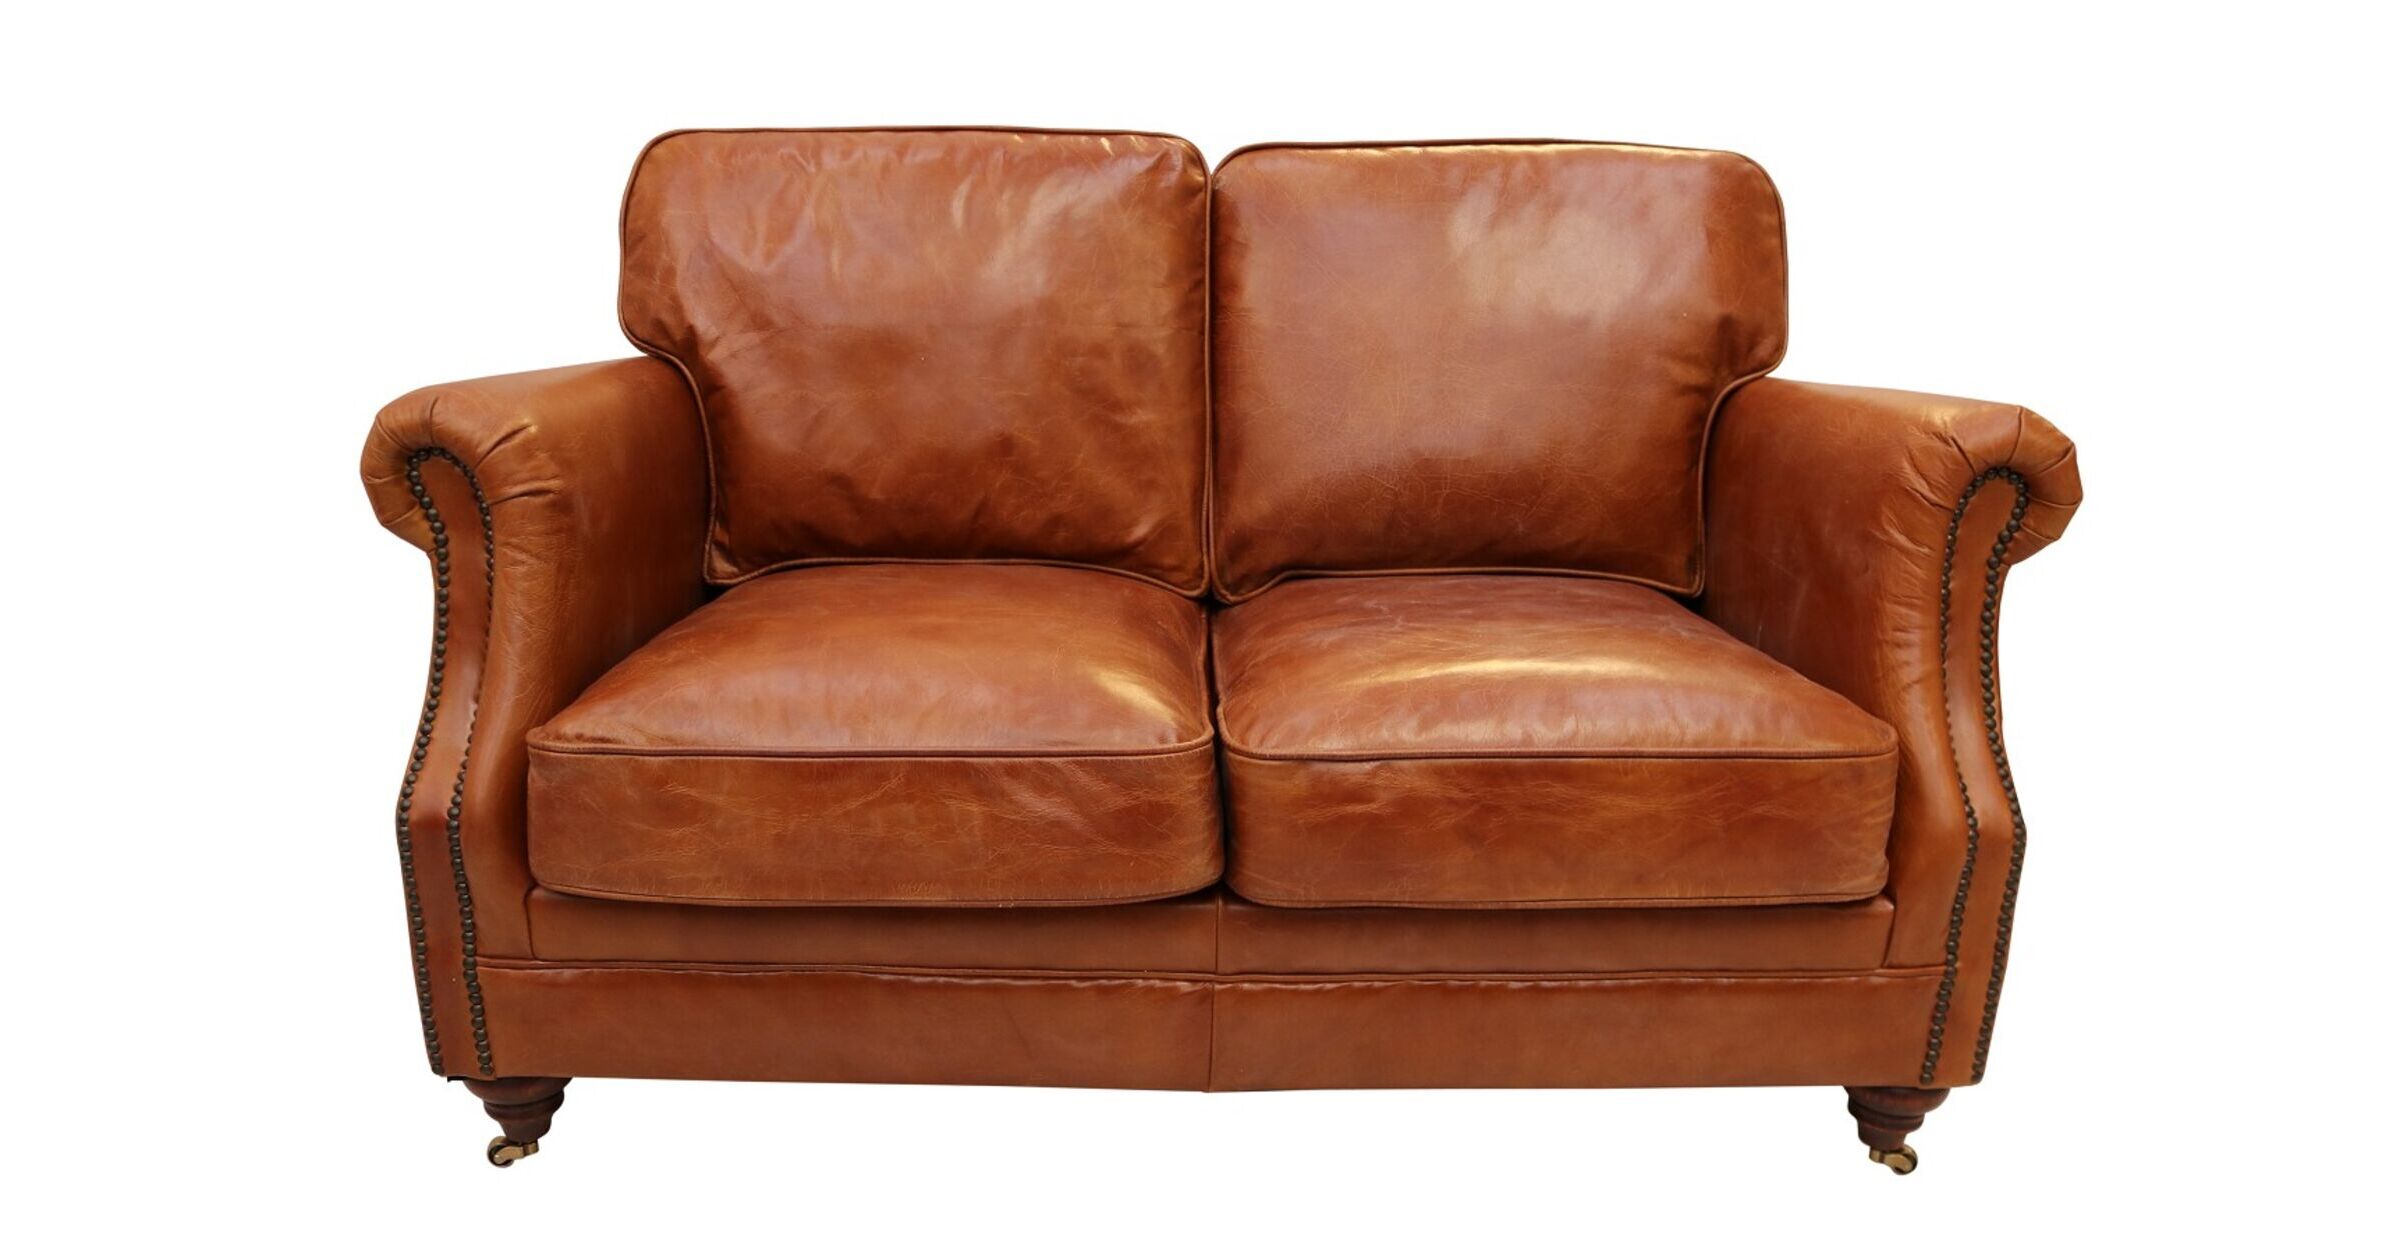 buy cheap leather sofa online